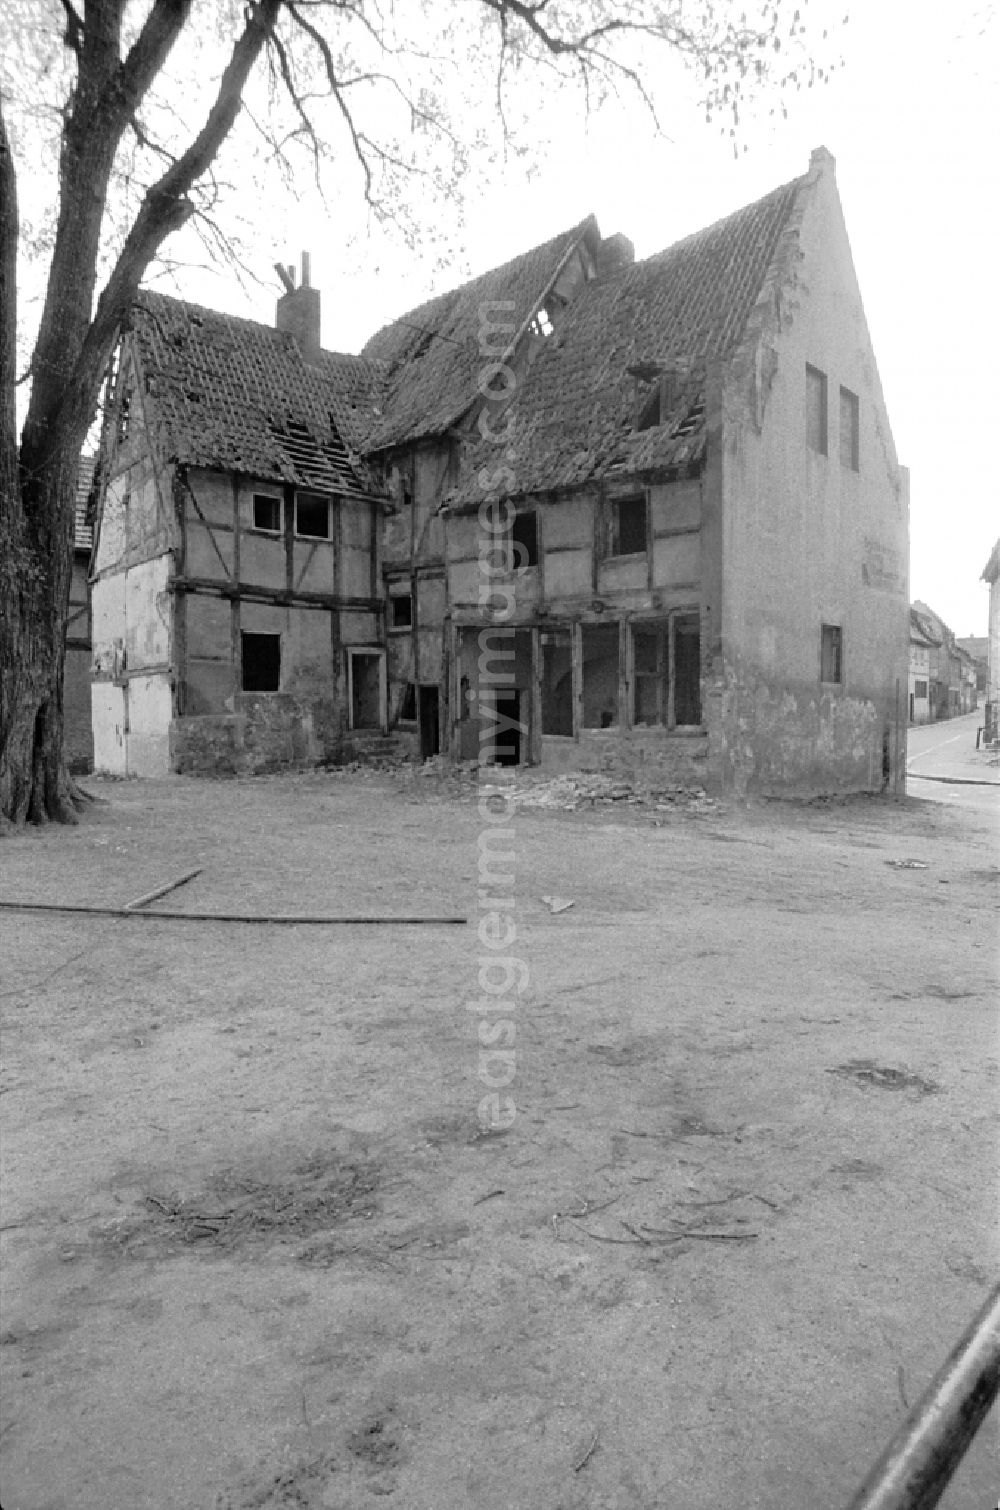 GDR photo archive: Quedlinburg - Rubble and ruins Rest of the facade and roof structure of the half-timbered house in the district Altstadt in Quedlinburg, Saxony-Anhalt on the territory of the former GDR, German Democratic Republic